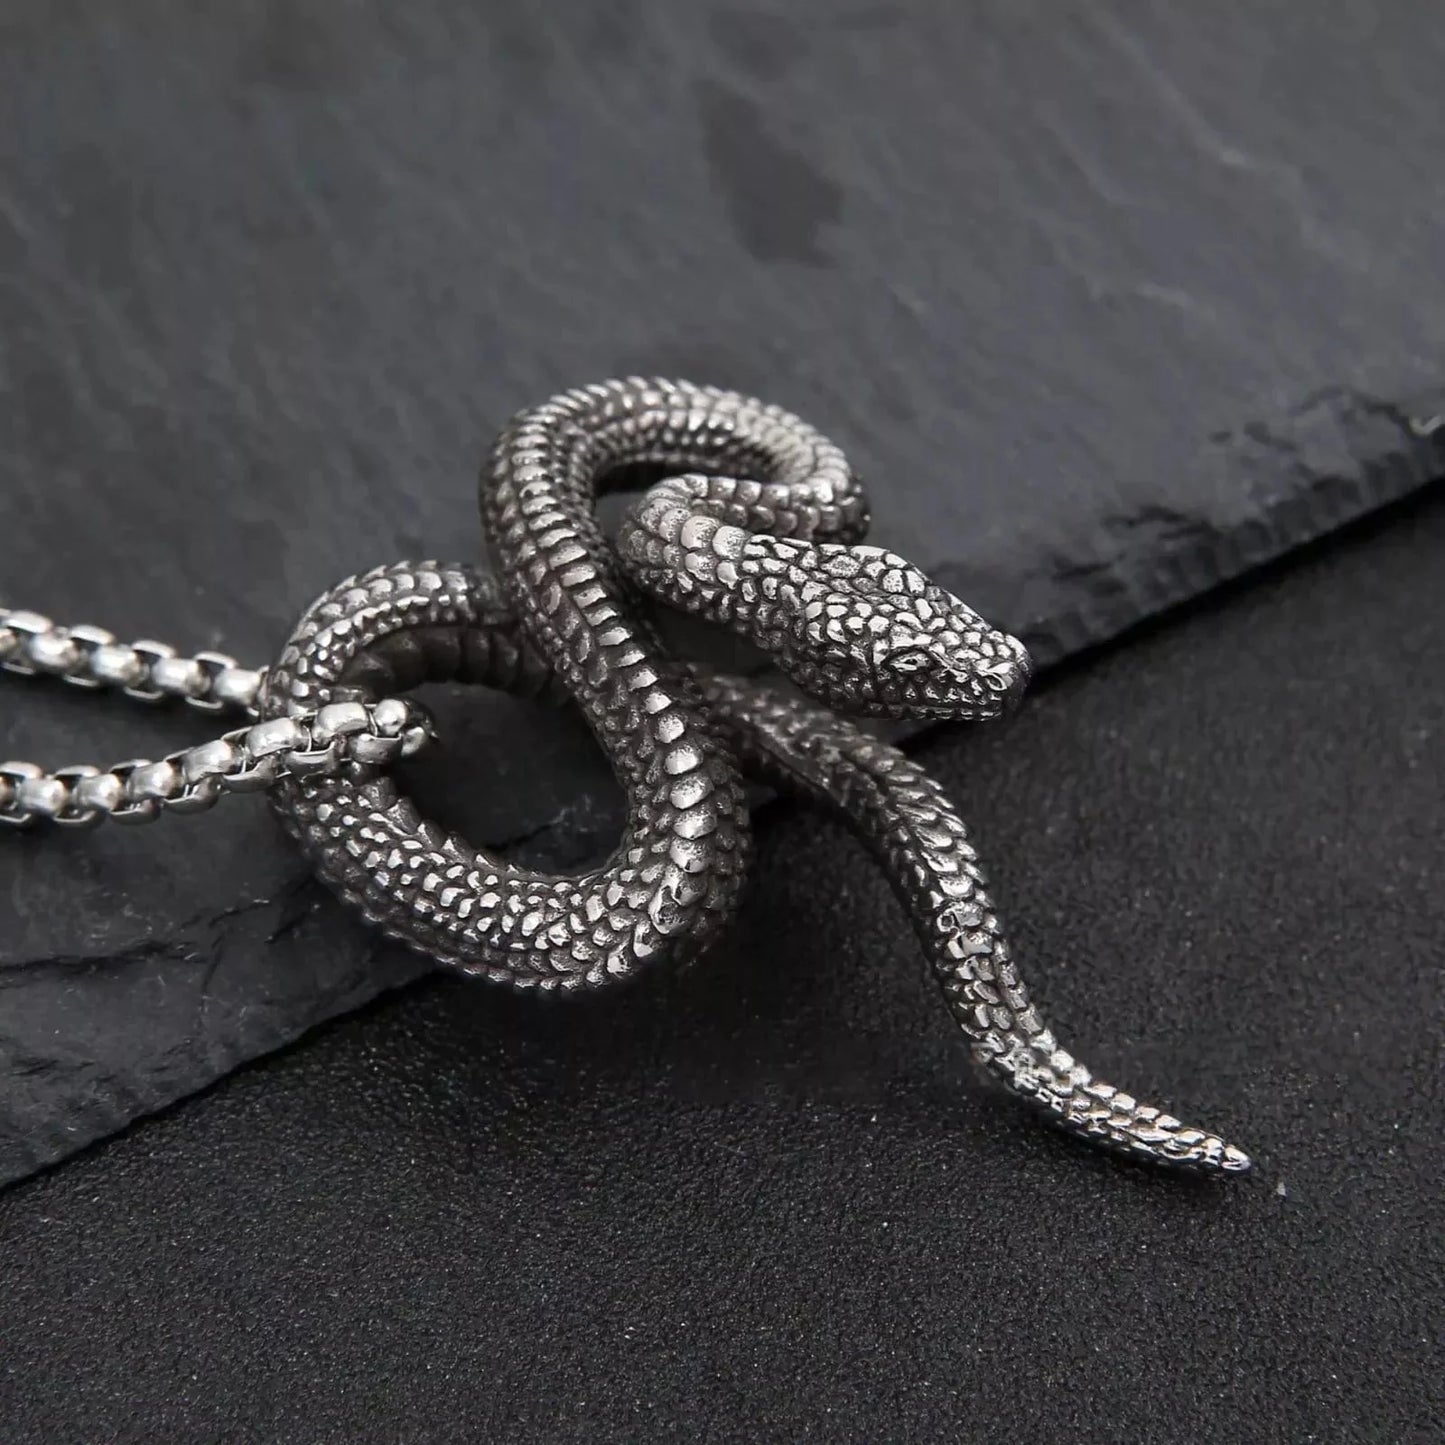 THE MEN THING Alloy Snake Pendant with Pure Stainless Steel 24inch Chain for Men, European trending Style - Round Box Chain & Pendant for Men & Boy